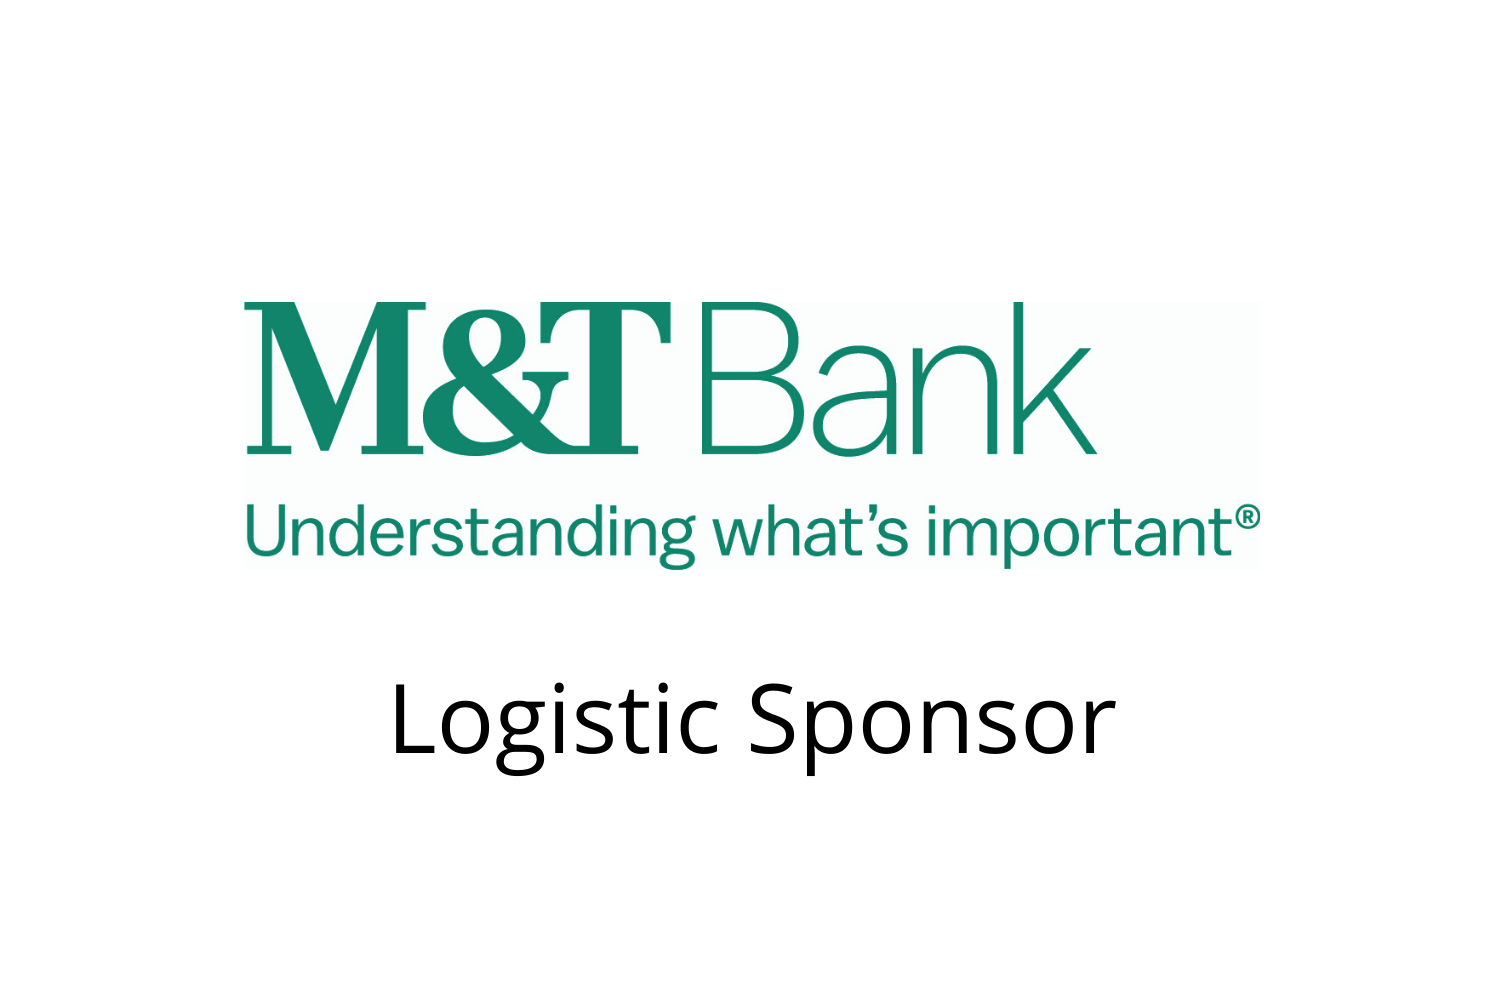 M&T Bank. T me bank leads